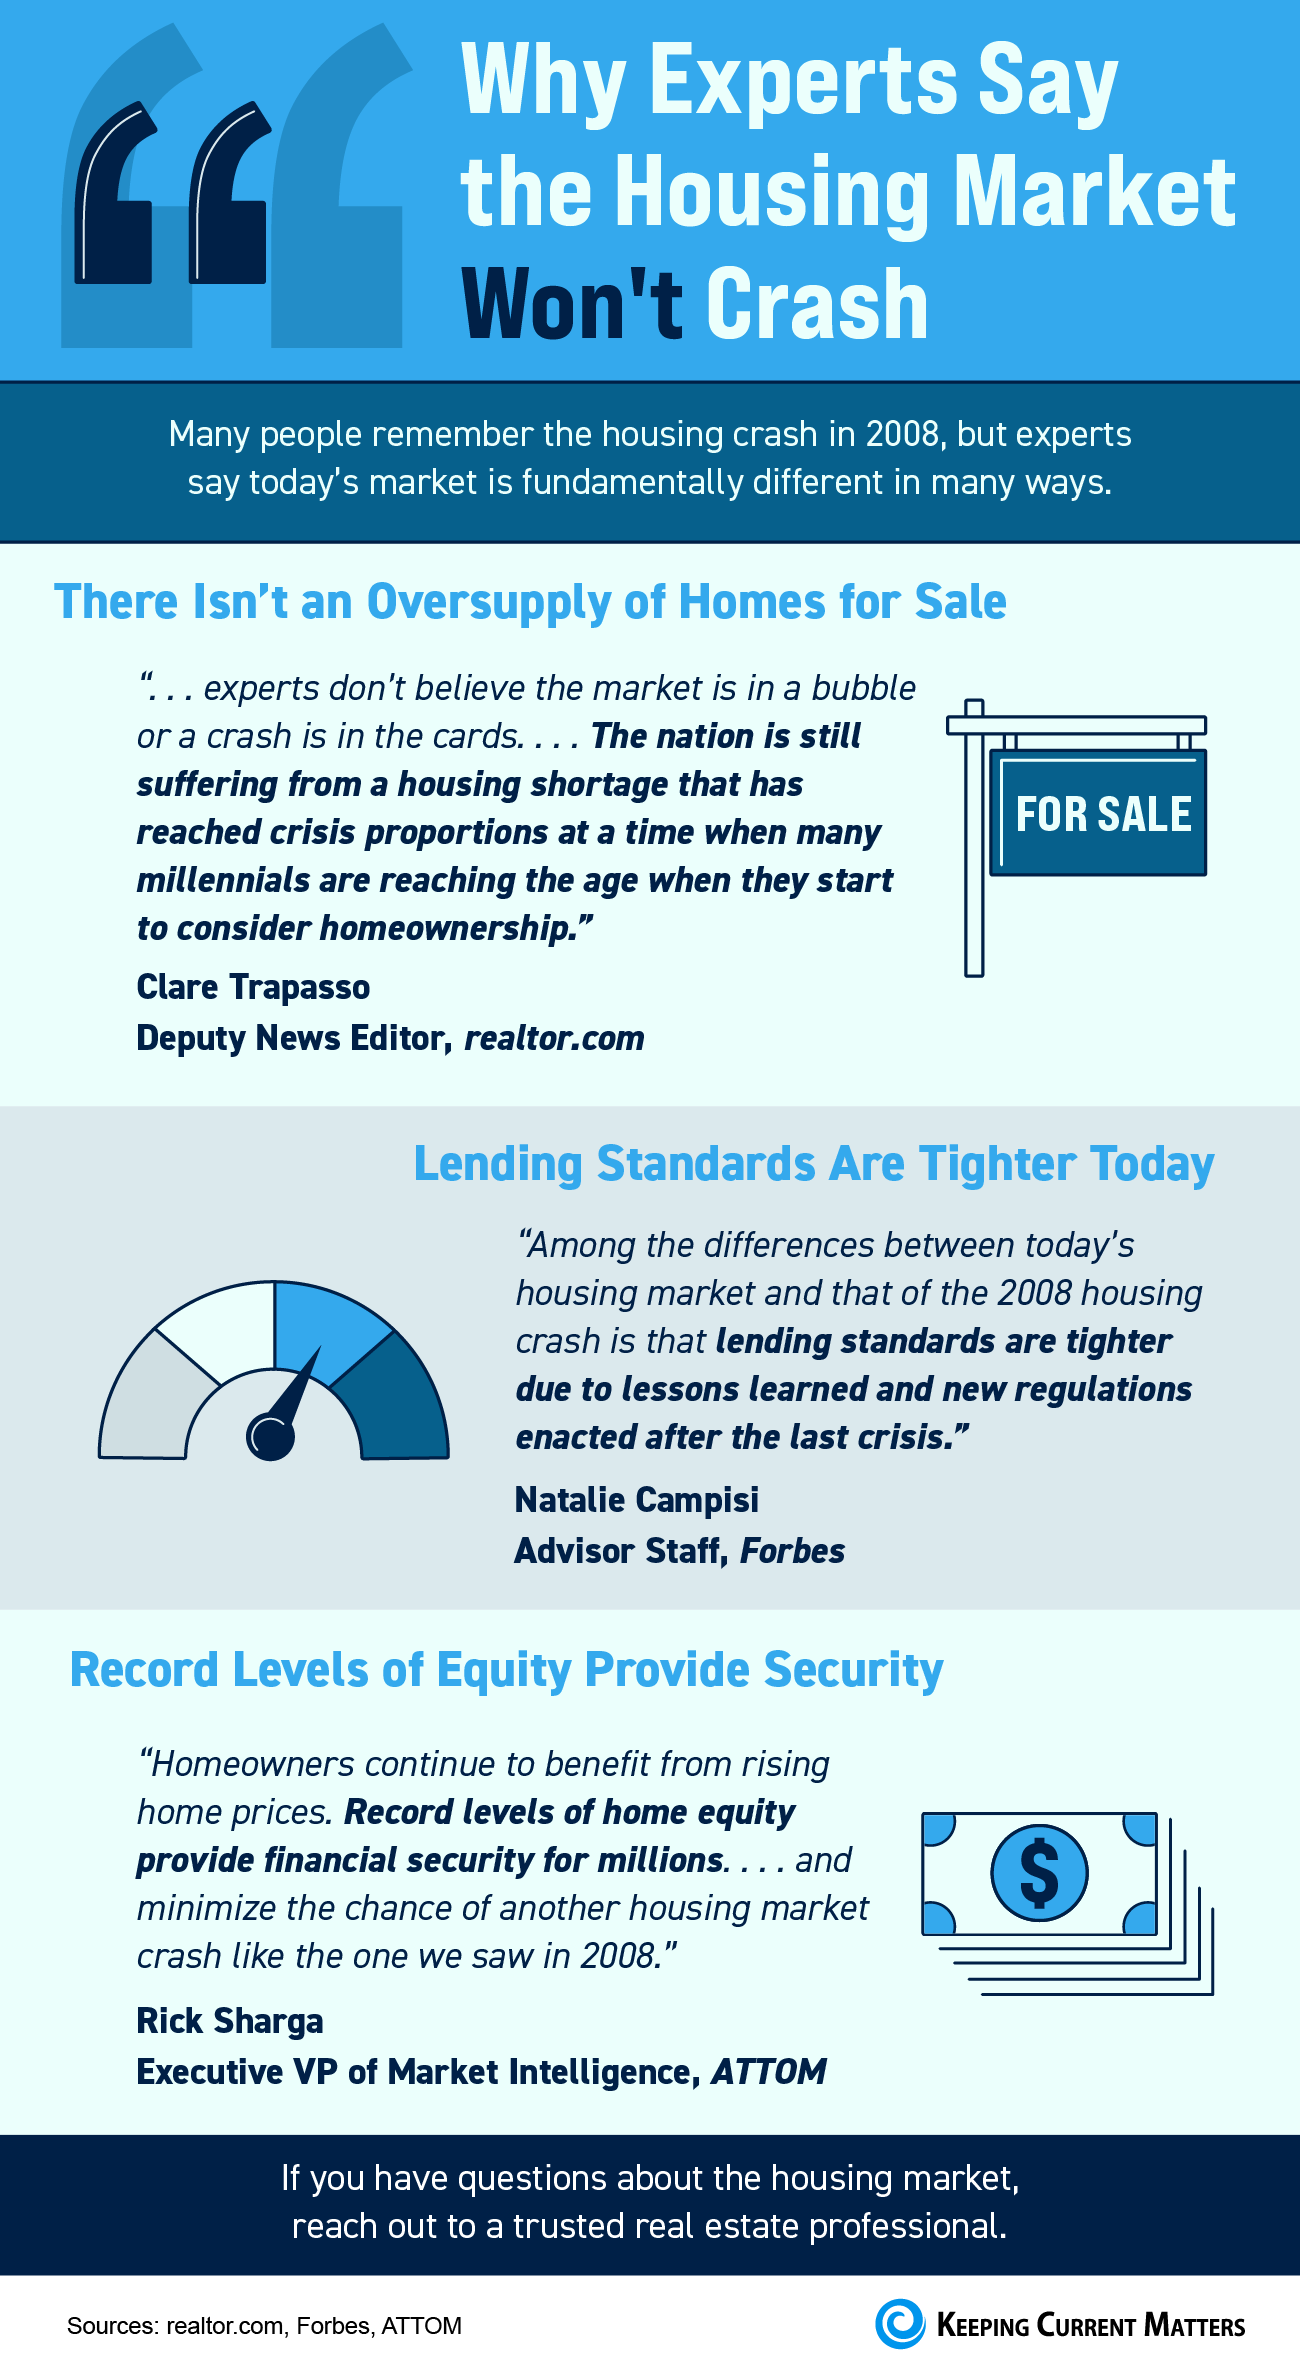 Why Experts Say the Housing Market Won’t Crash [INFOGRAPHIC] | Keeping Current Matters